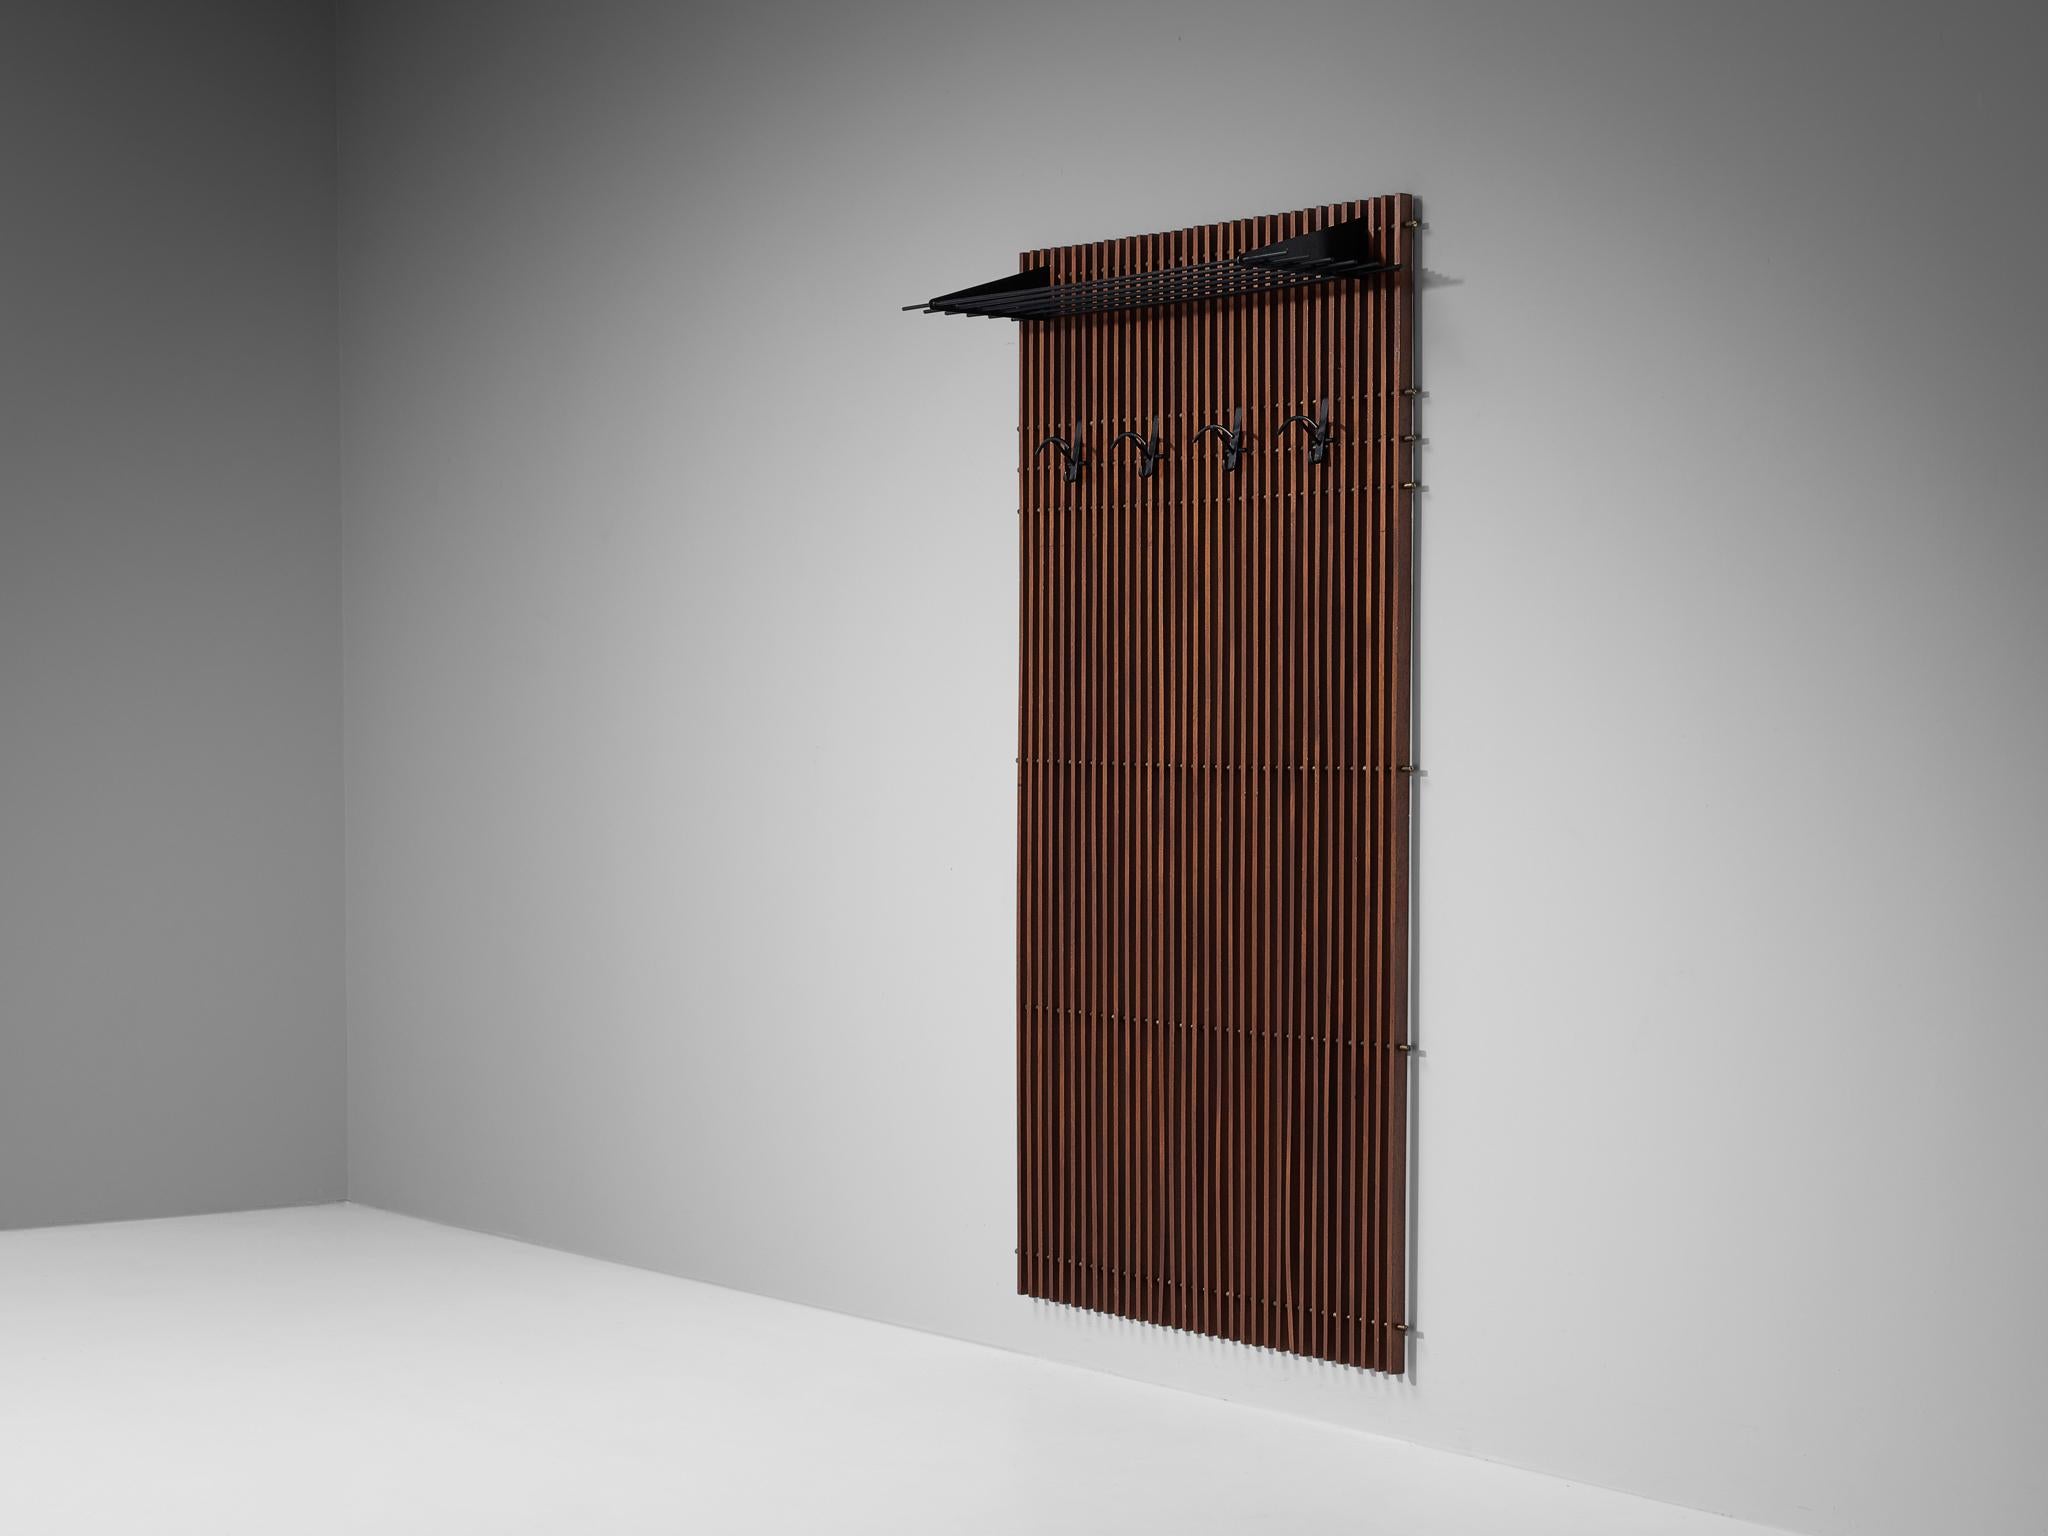 Hall stand or coat rack, teak, brass, coated steel, Italy, 1960s.

Sophisticated hall stand or coat rack made in Italy in the 1960s. This piece is build up from vertical slats of teakwood, creating a wall mounted hall stand or coat rack. The top